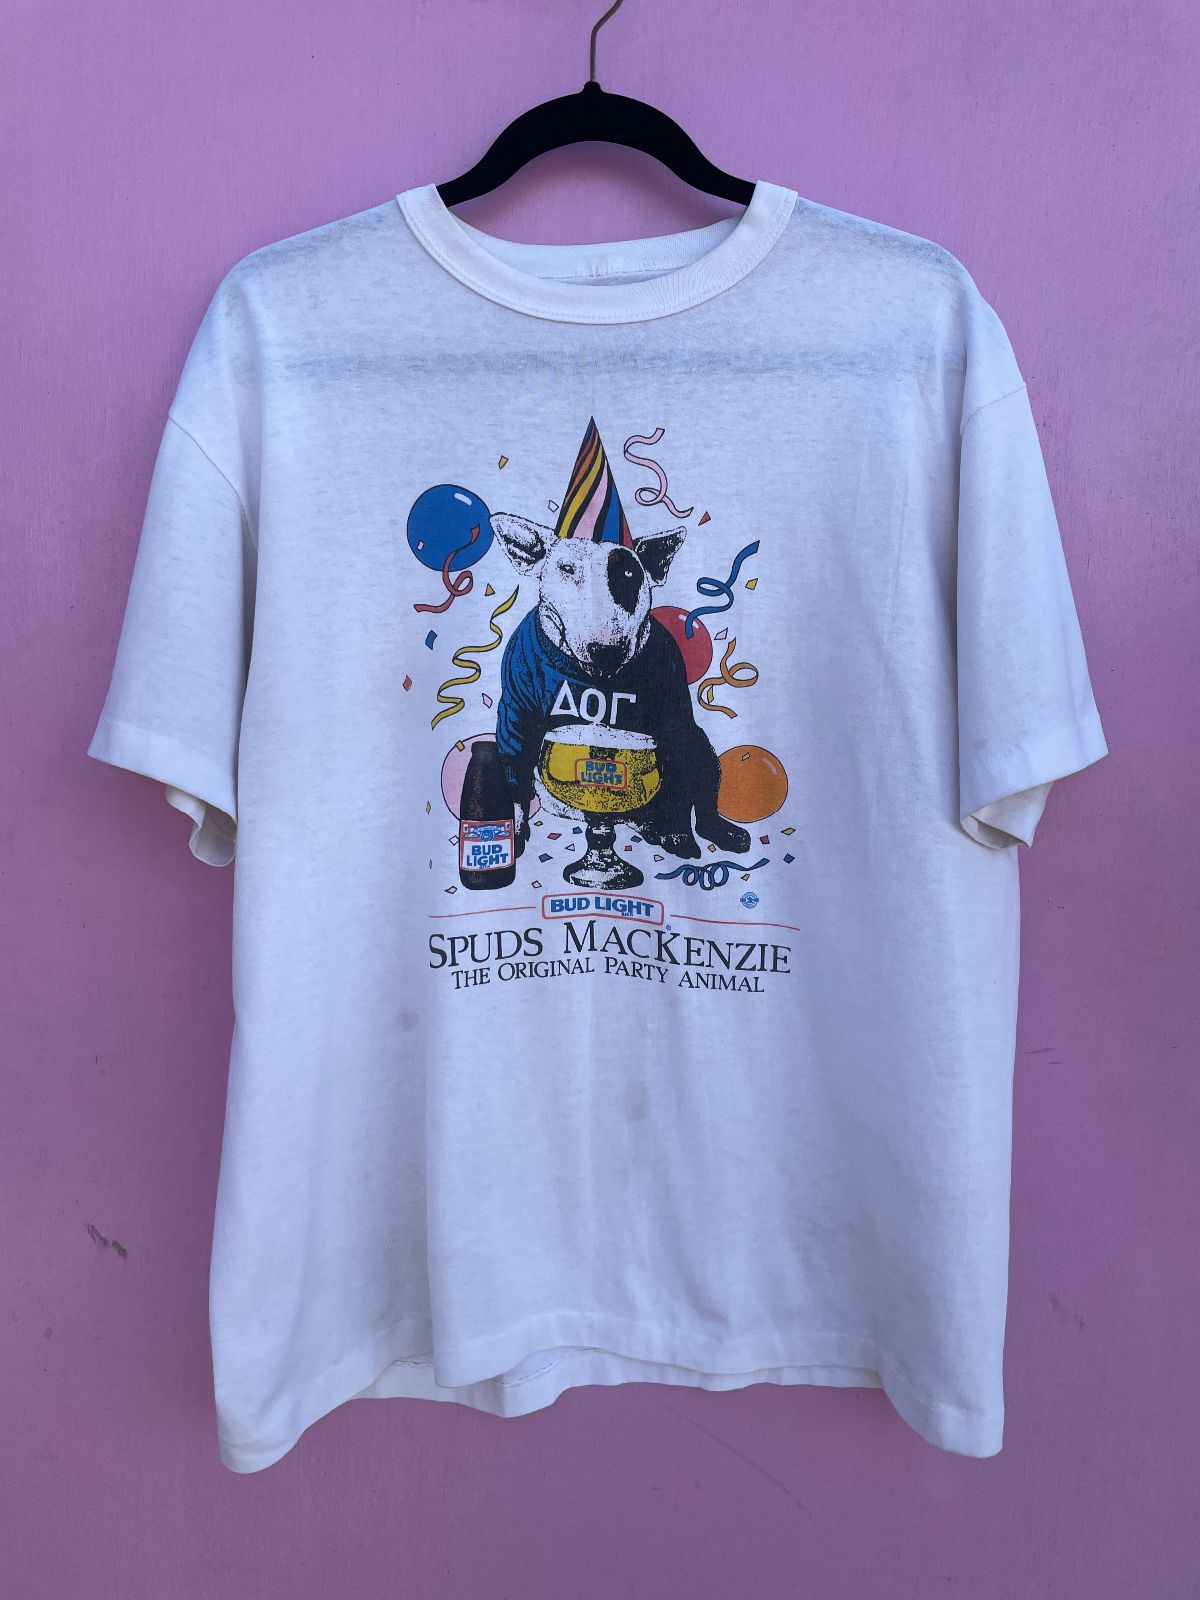 product details: *AS-IS* SPUDS MACKENZIE BUD LIGHT THE ORIGINAL PARTY ANIMAL SINGLE STITCH T SHIRT photo